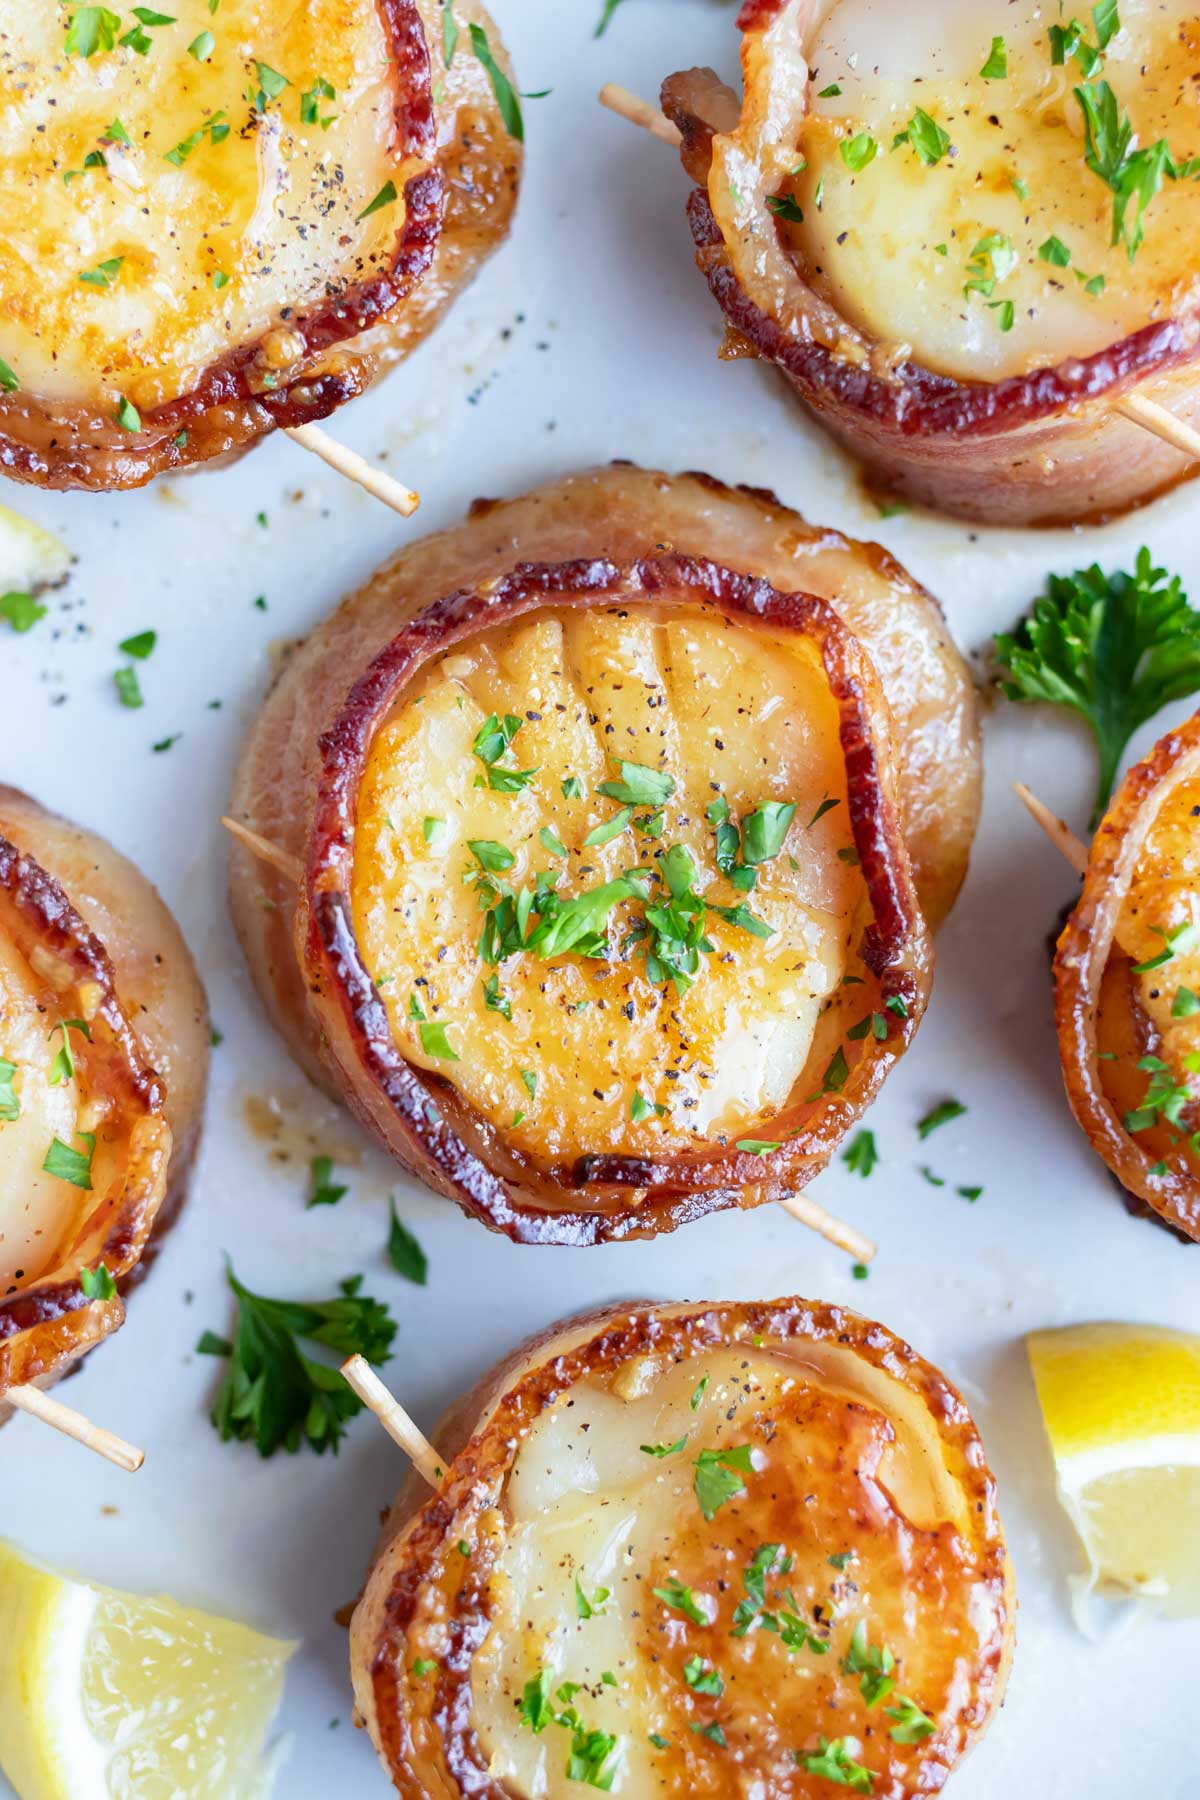 A serving plate full of bacon wrapped scallops for a dinner party appetizer or fancy seafood dinner date.